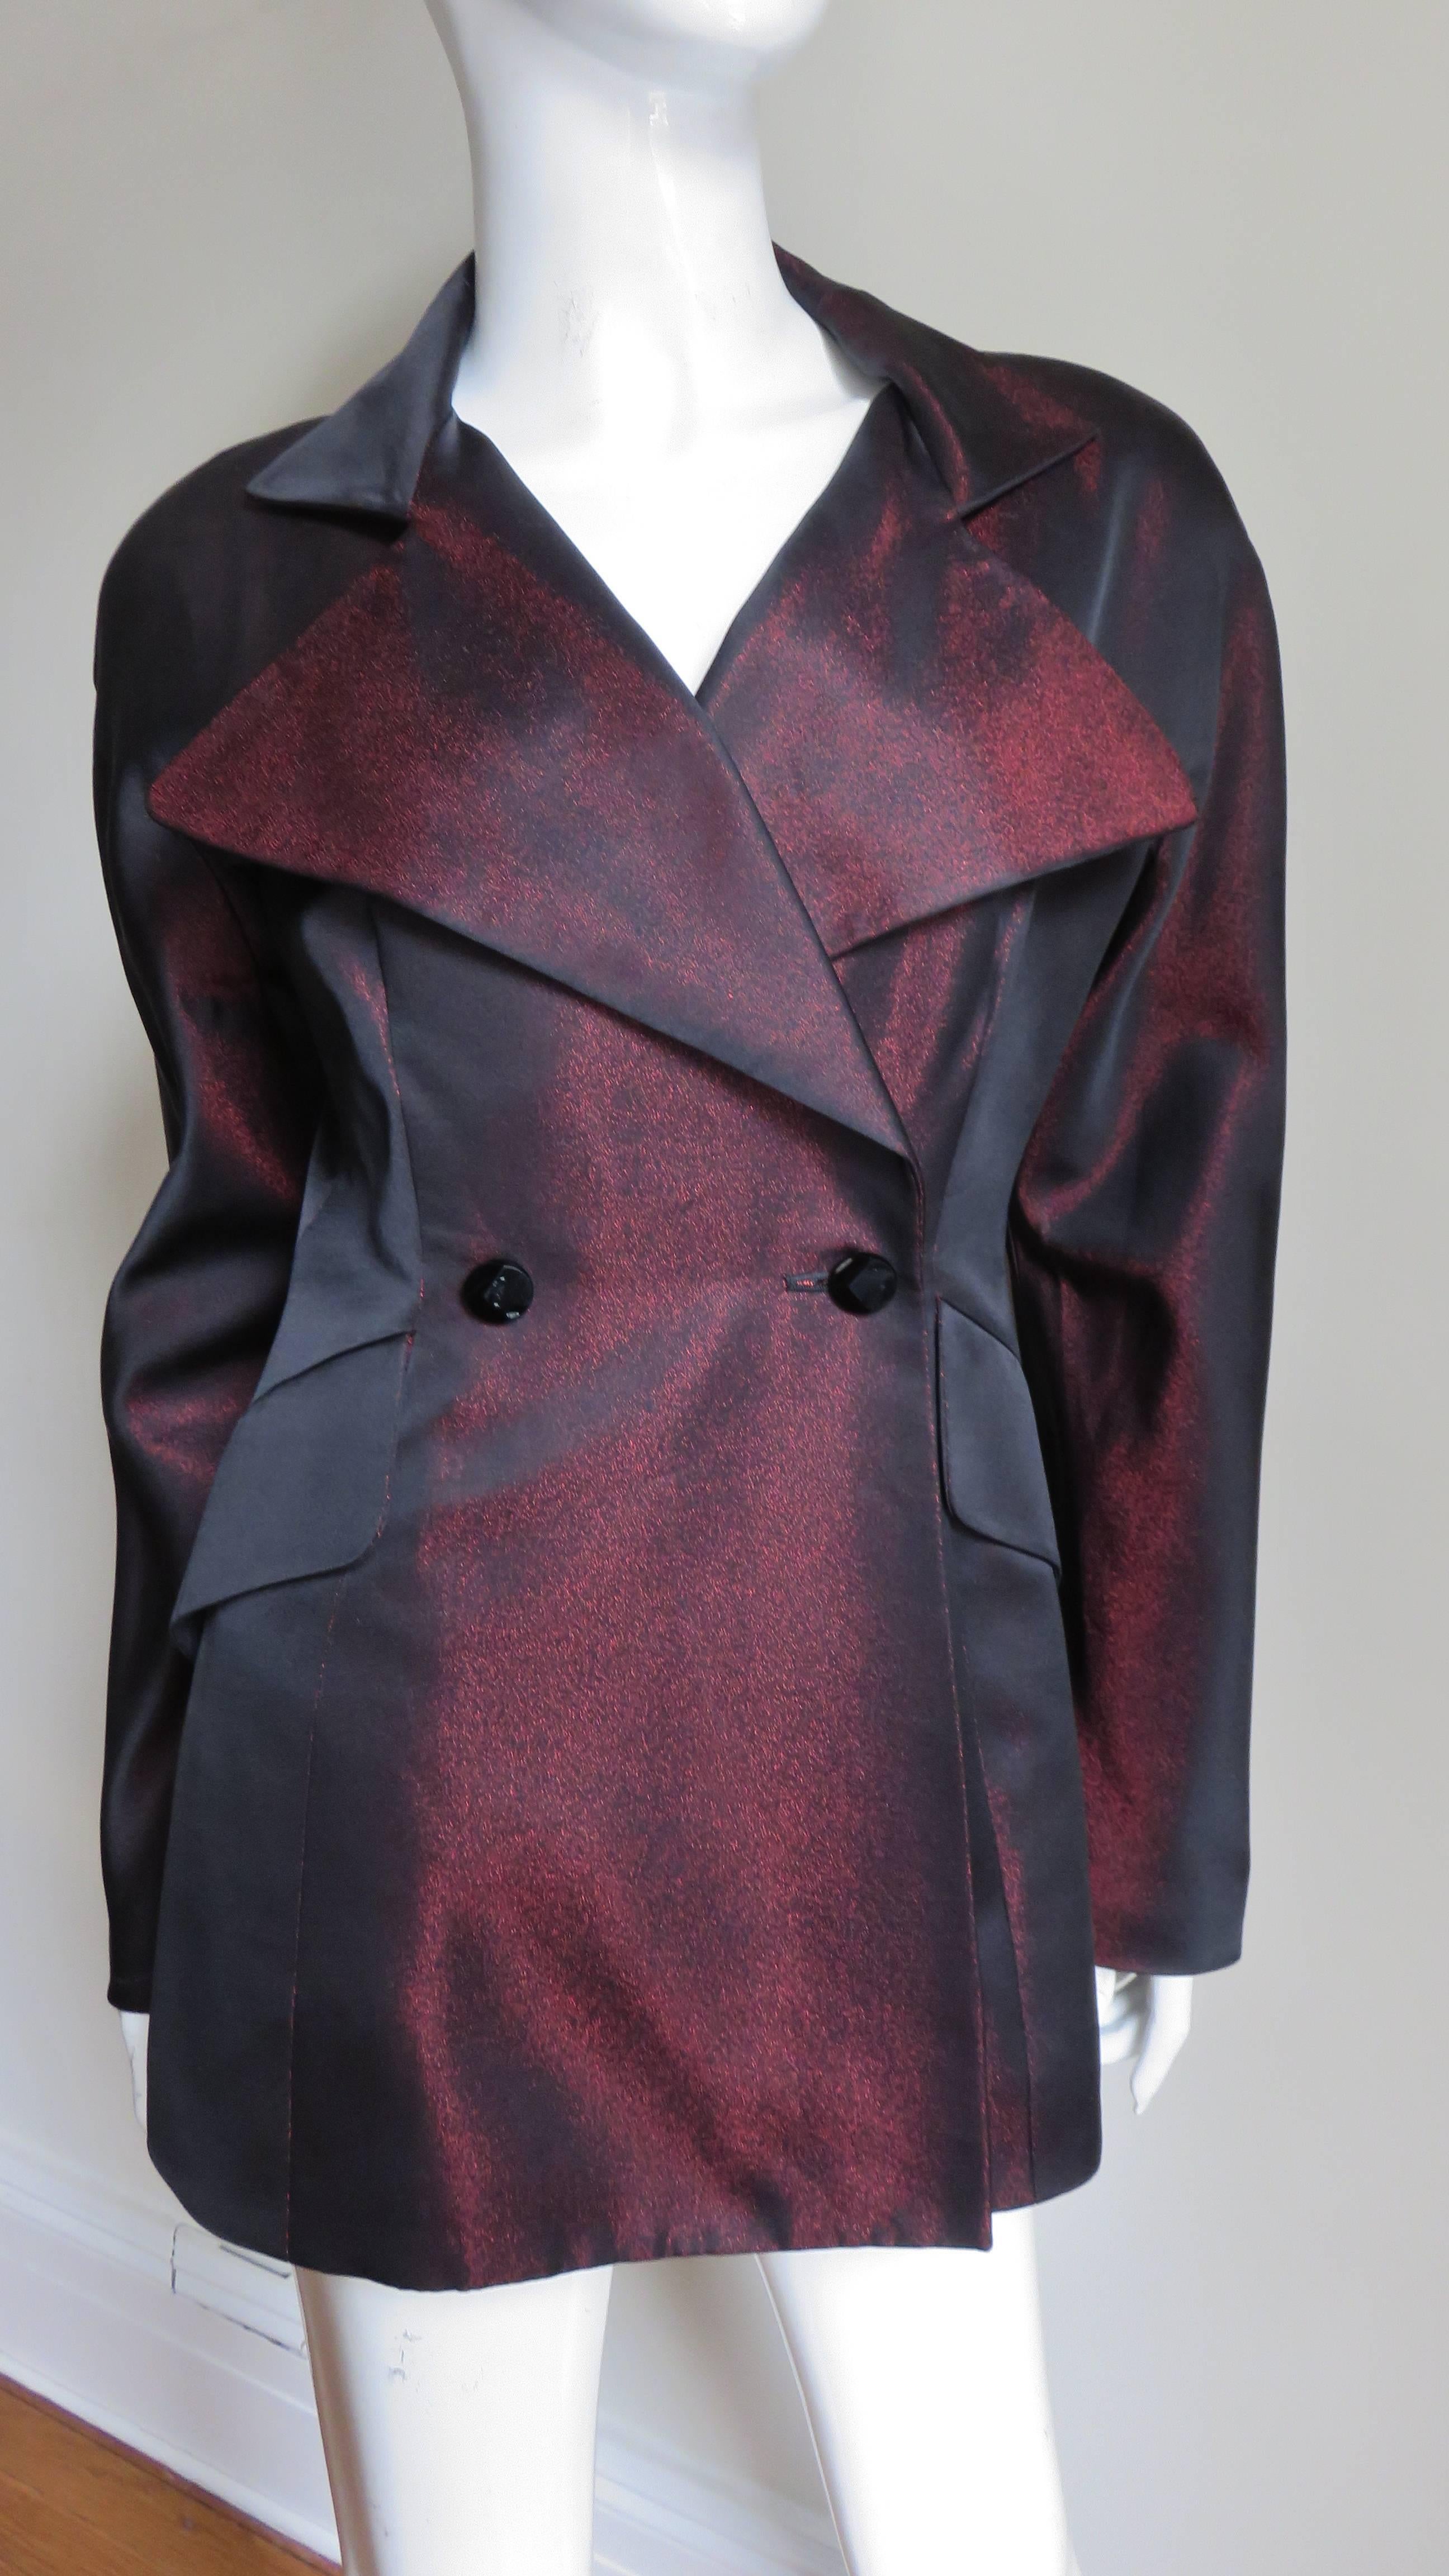 A fabulous iridescent burgundy and black silk blend jacket by Claude Montana. The peak lapel jacket is double breasted closing with front faceted black glass buttons. It has subtle dolman sleeves, 2 flap welt pockets in front and it is fully